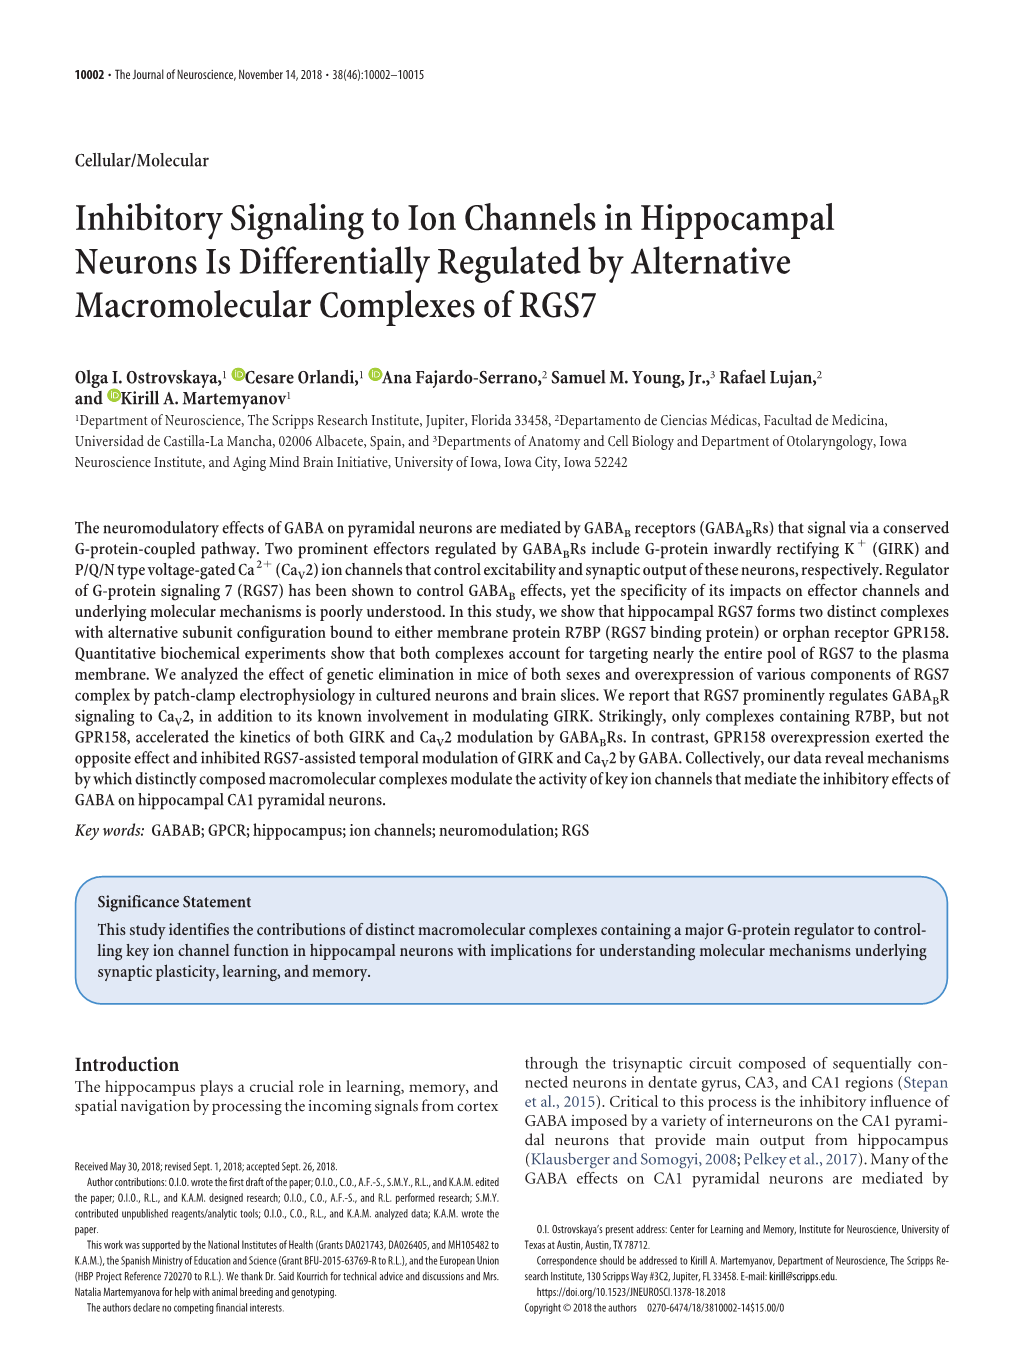 Inhibitory Signaling to Ion Channels in Hippocampal Neurons Is Differentially Regulated by Alternative Macromolecular Complexes of RGS7